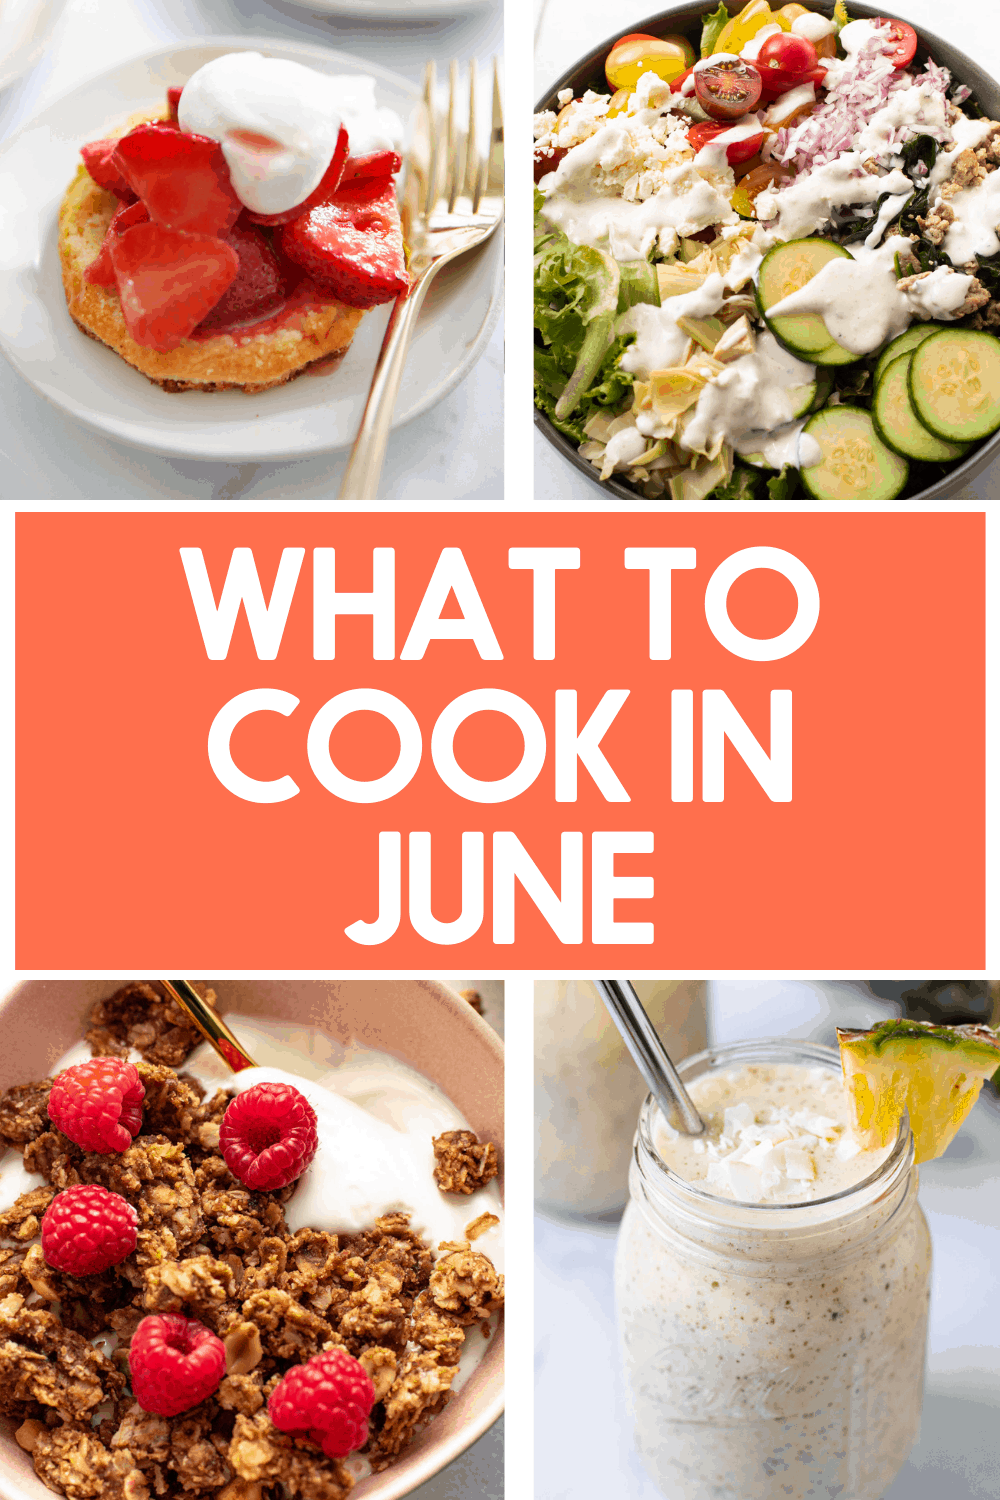 What to cook in June